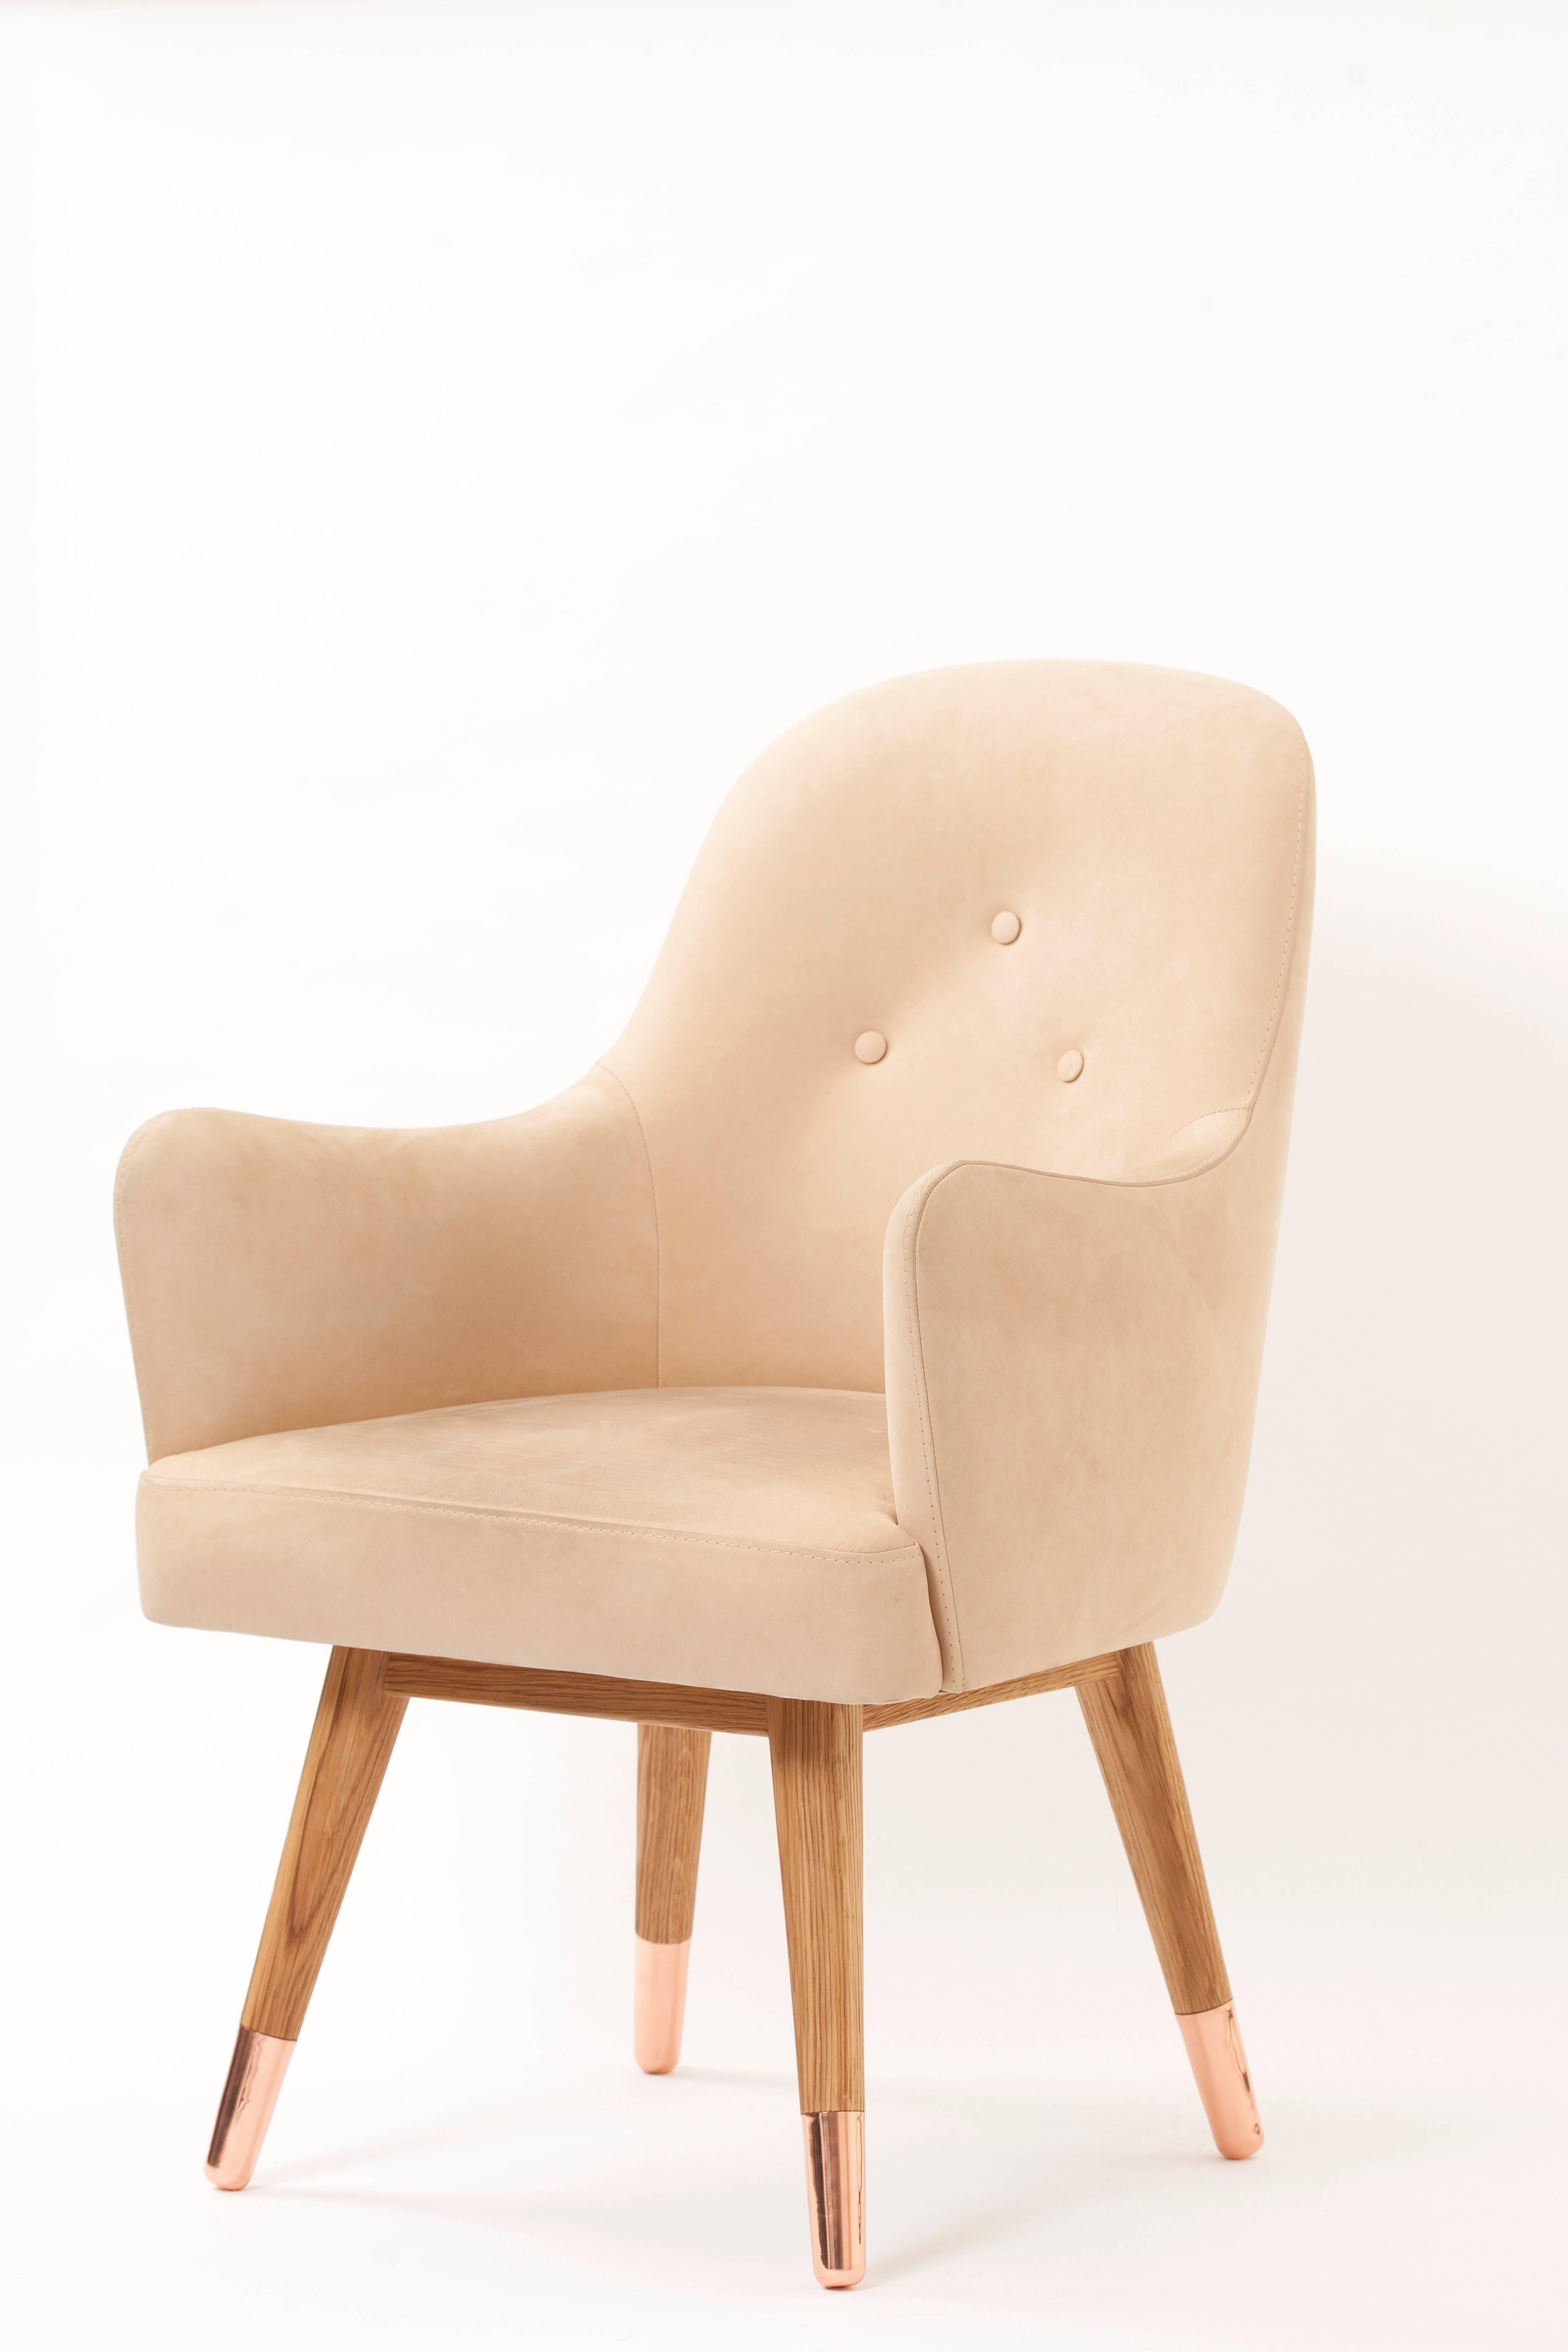 Hand-Crafted Contemporary Dandy Chair with Beige Suede Leather, Walnut and Brass